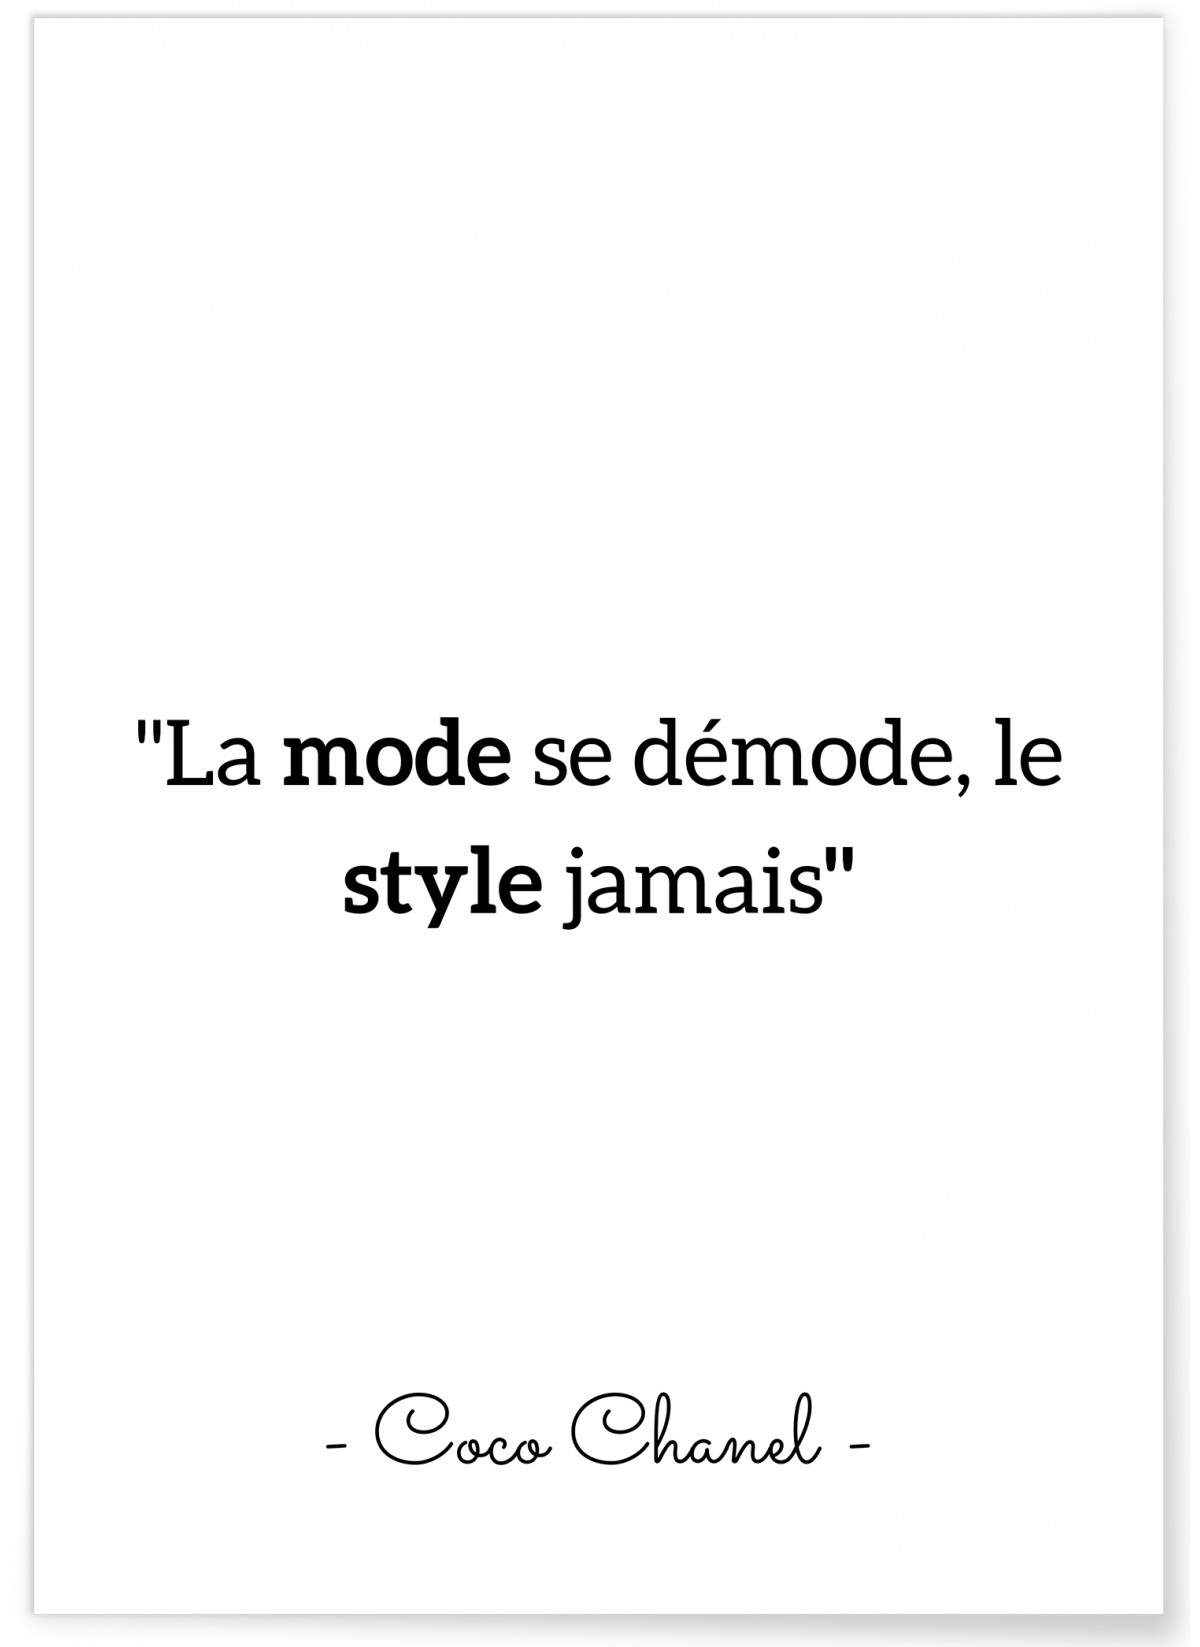 Wall decal La mode se démode le style jamais  Coco Chanel  Wall stickers  QUOTE WALL STICKERS French  Ambiancesticker